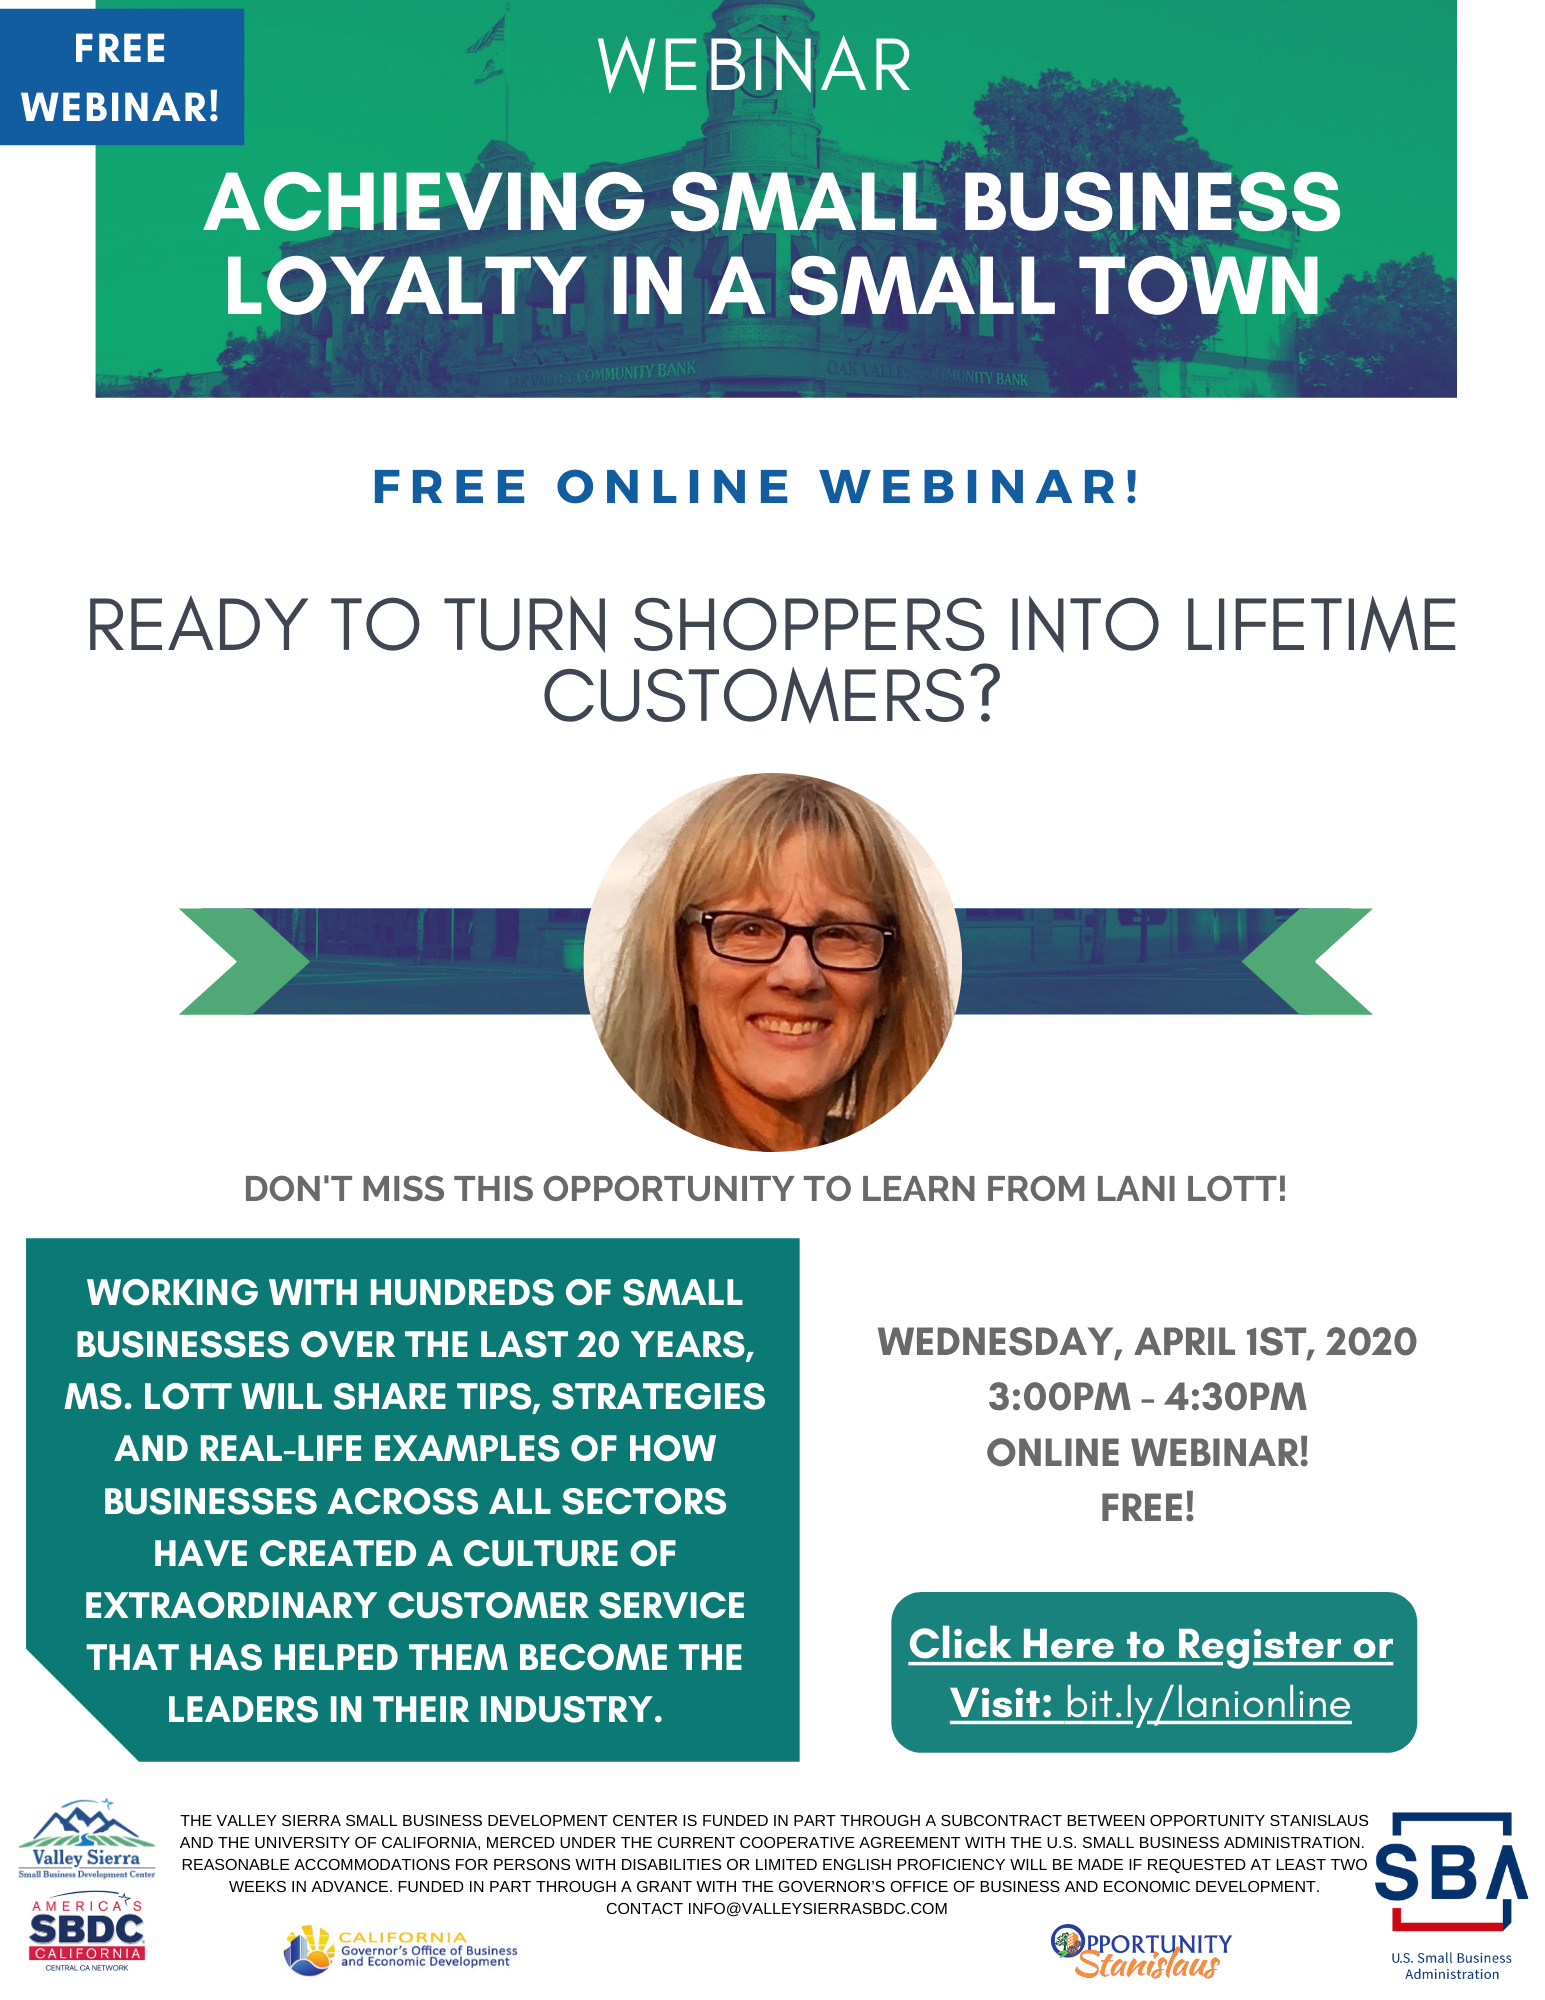 Event Flyer, Webinar: Small Business Loyalty in a Small Town - 4/1 3pm - 4:30pm. FREE